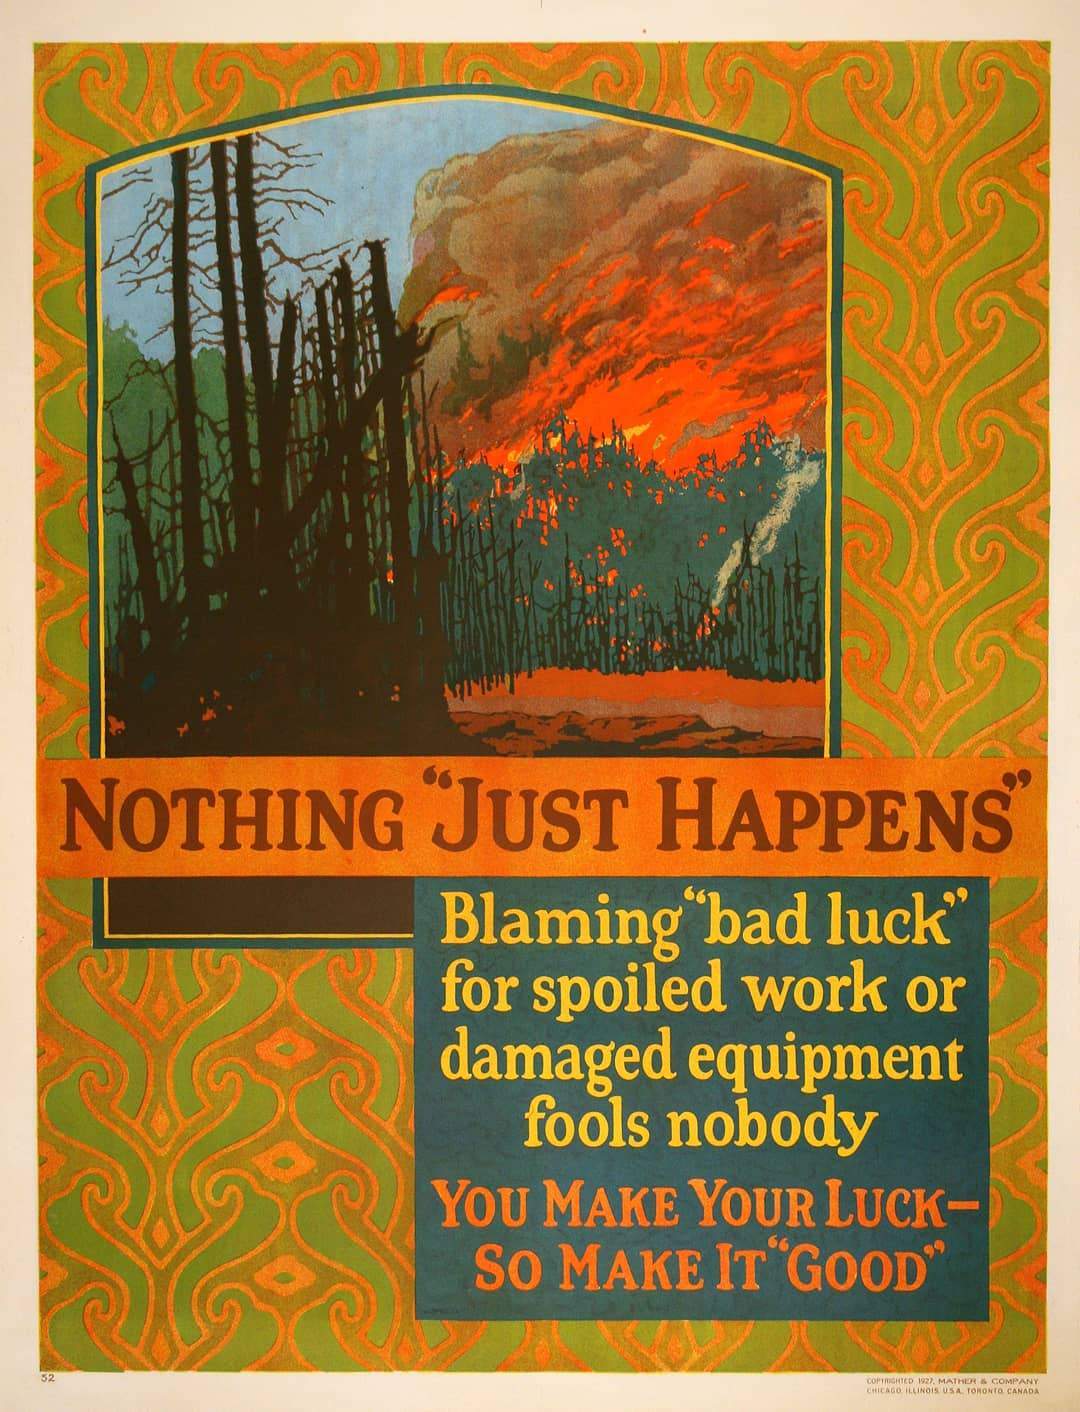 Original Mather Work Incentive Poster 1927 - Nothing Just Happens